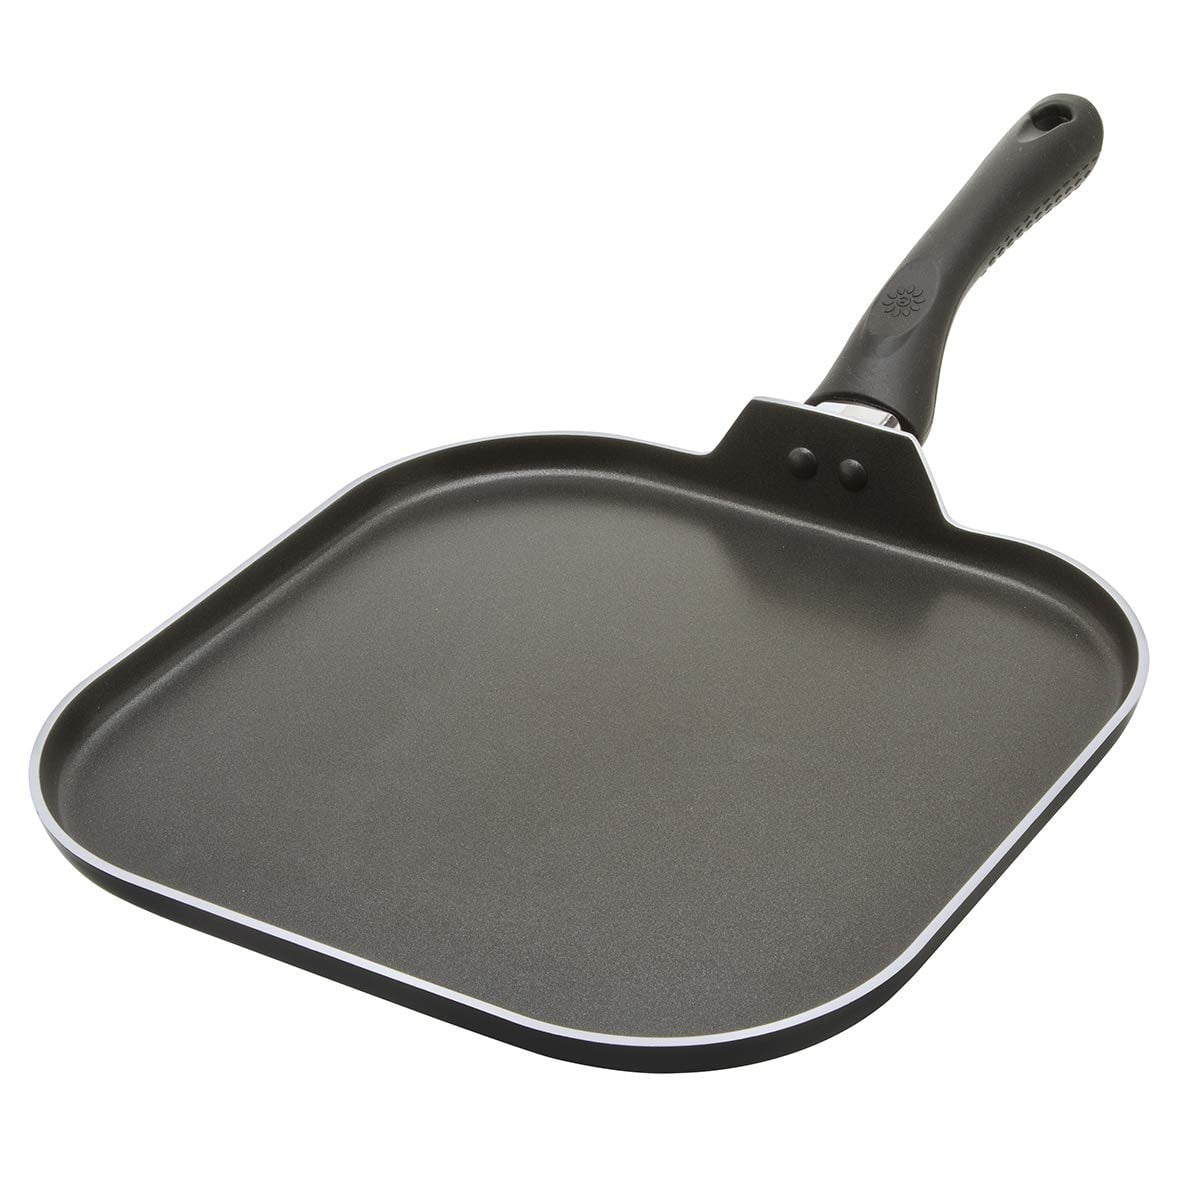 Ecolution Pure Heavy-Gauge Aluminum with a Soft Silicone Handle Non-Stick,  Fry Pan - 9.5 Inch, Crimson Red